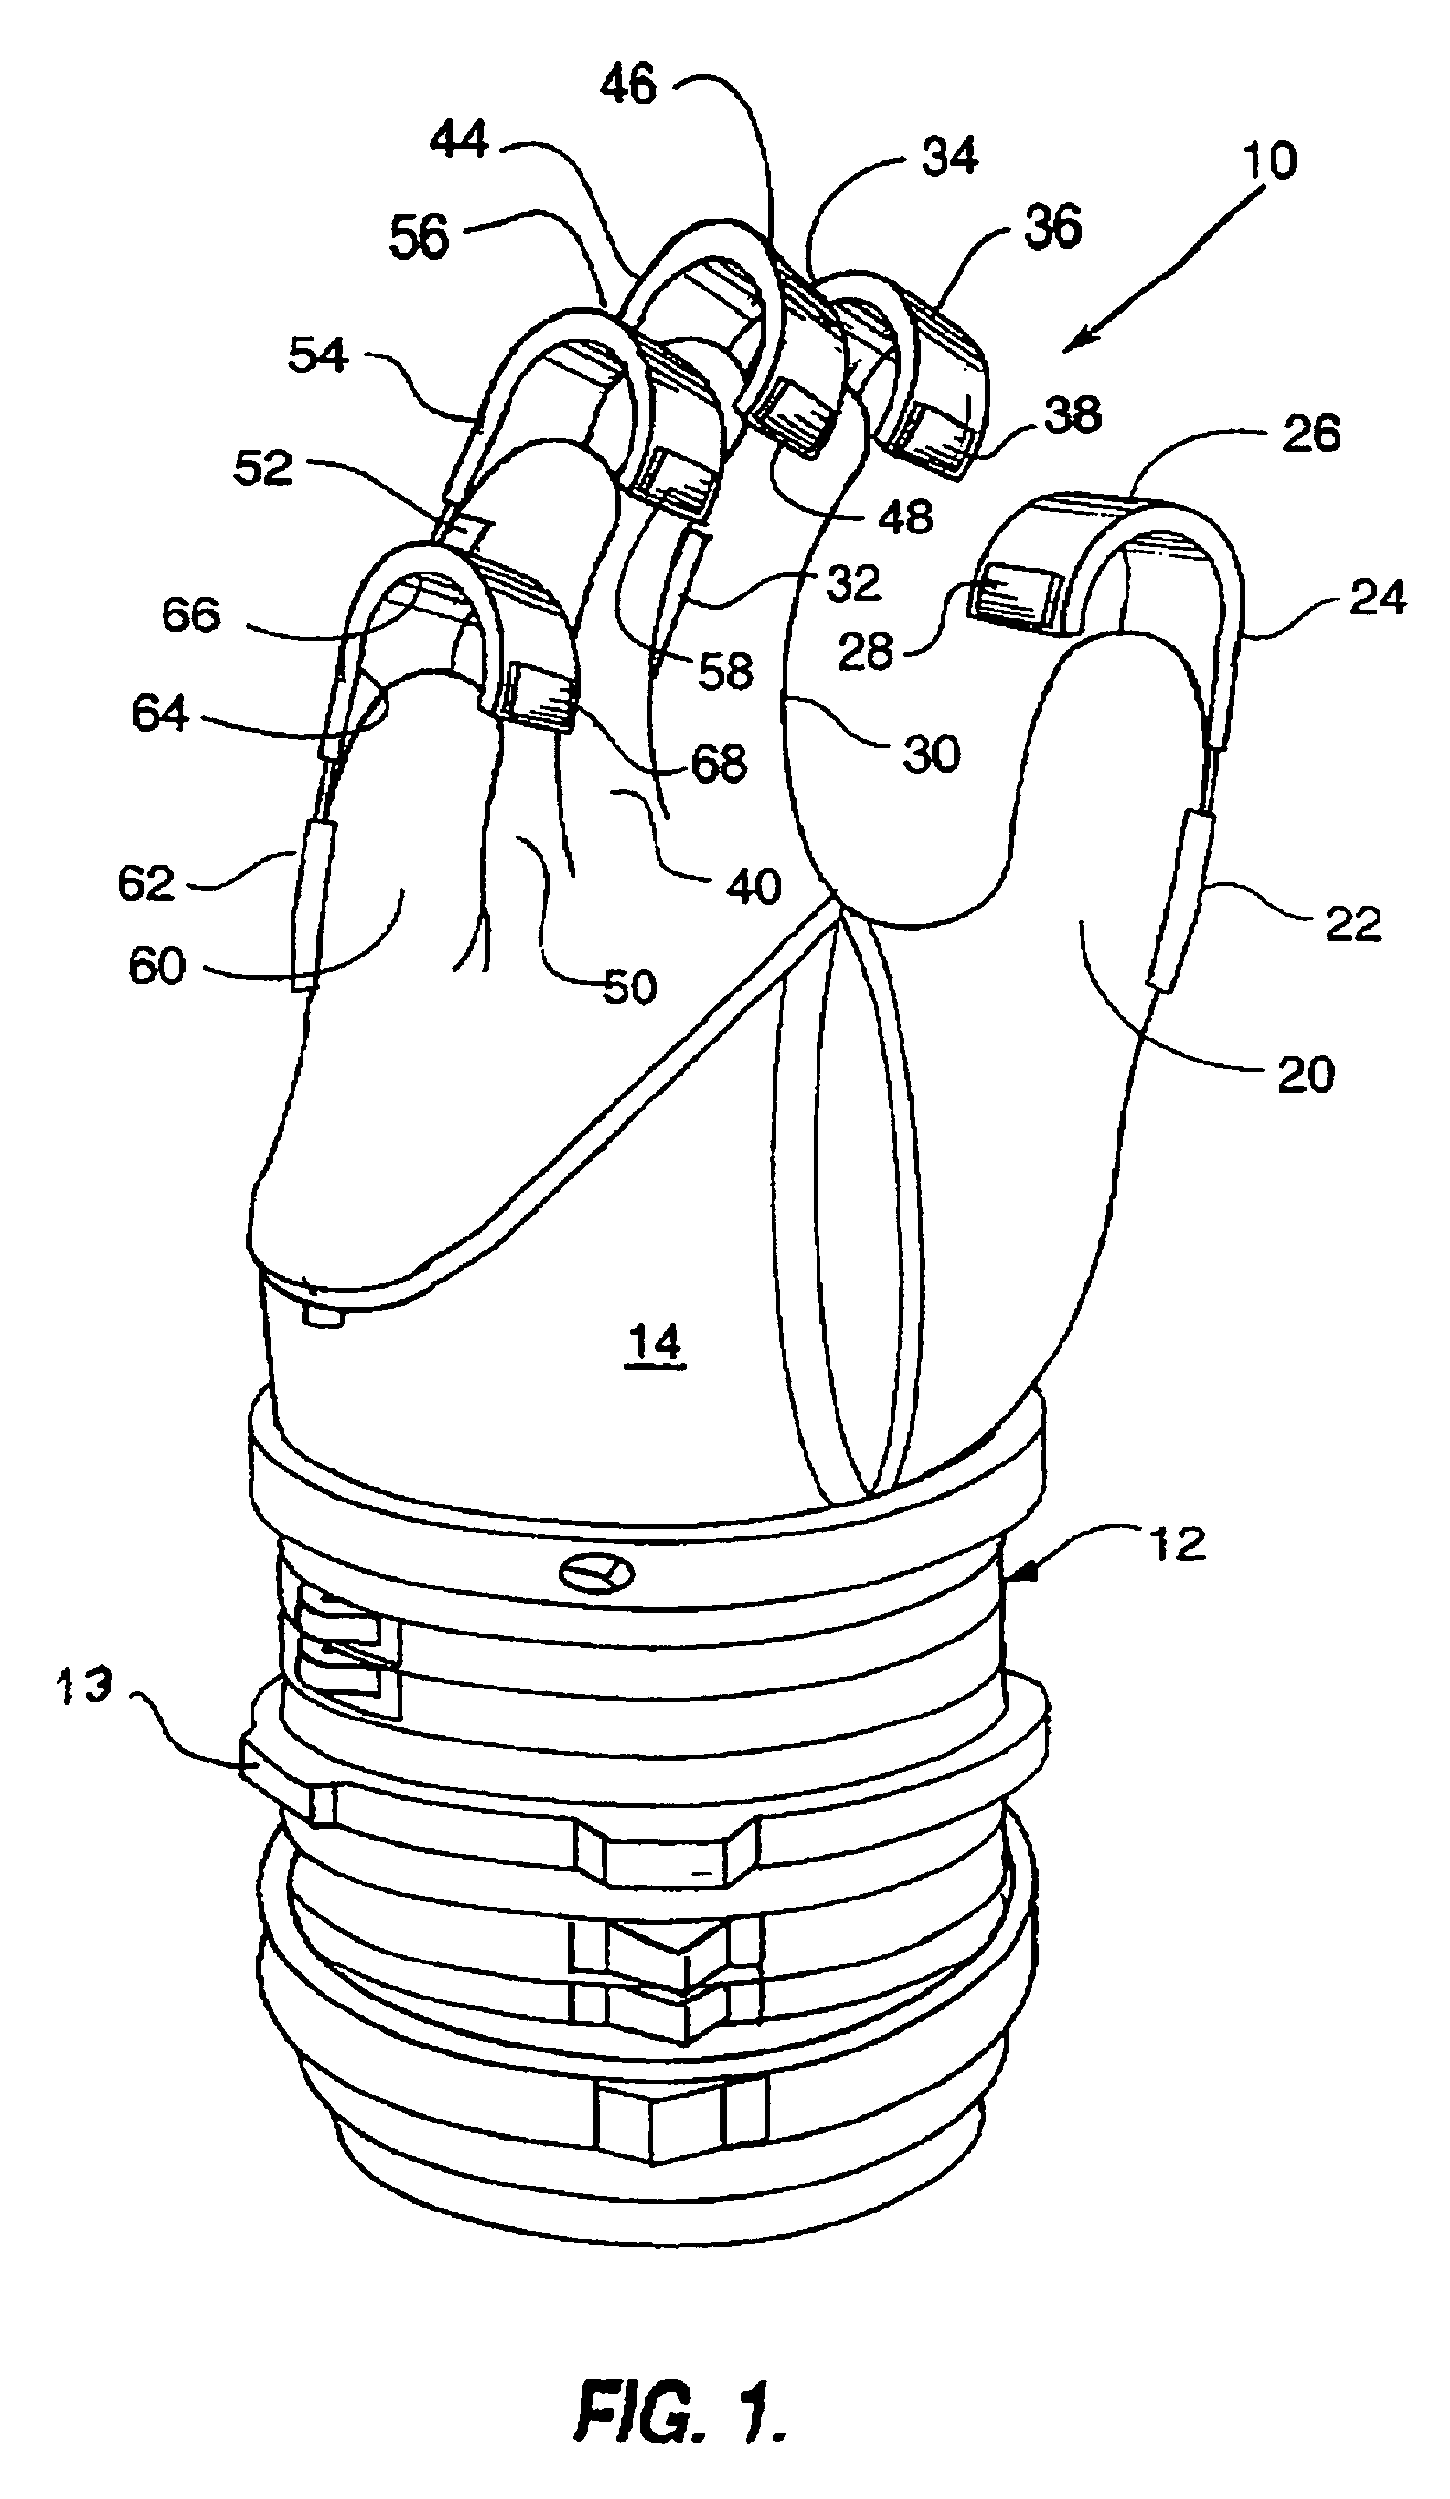 Astronaut glove with finger extensions